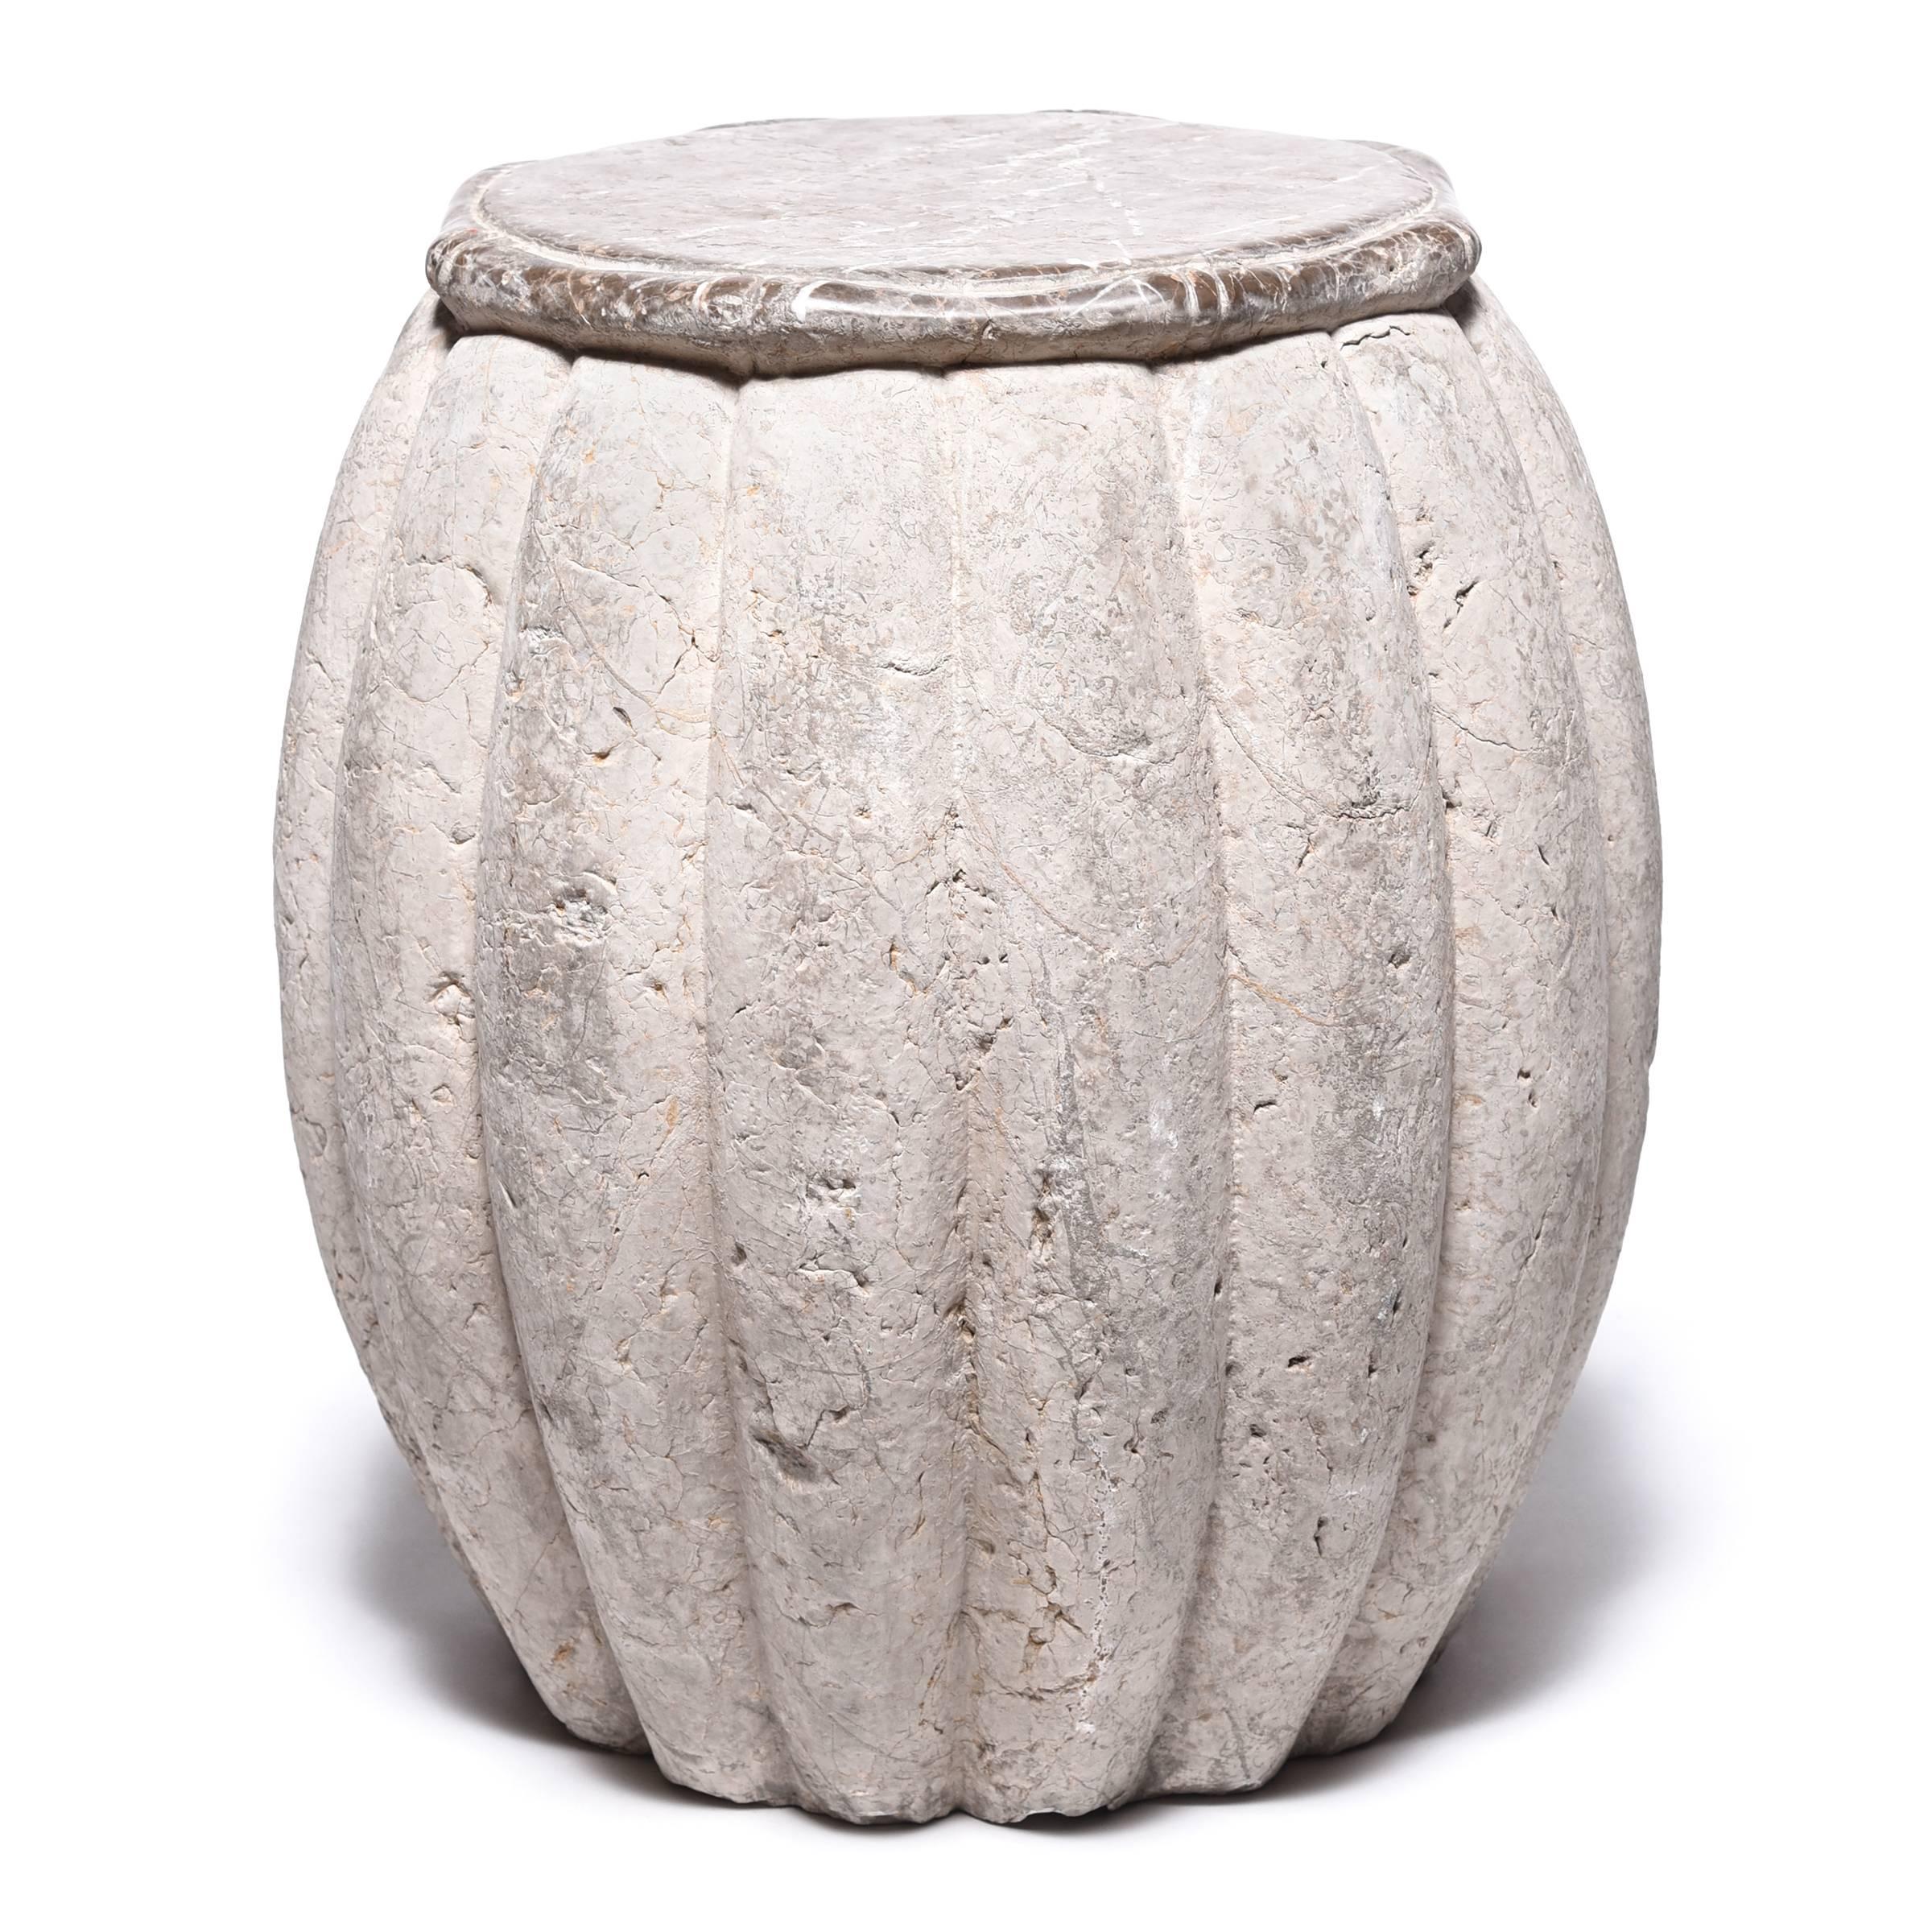 Hand-carved from limestone, this drum-shaped stool swells a ribbed melon shape, an ancient symbol of fertility. A smooth top with bamboo-like trim juxtaposes nicely with the drum’s organic grain and markings, while providing a level surface. We love